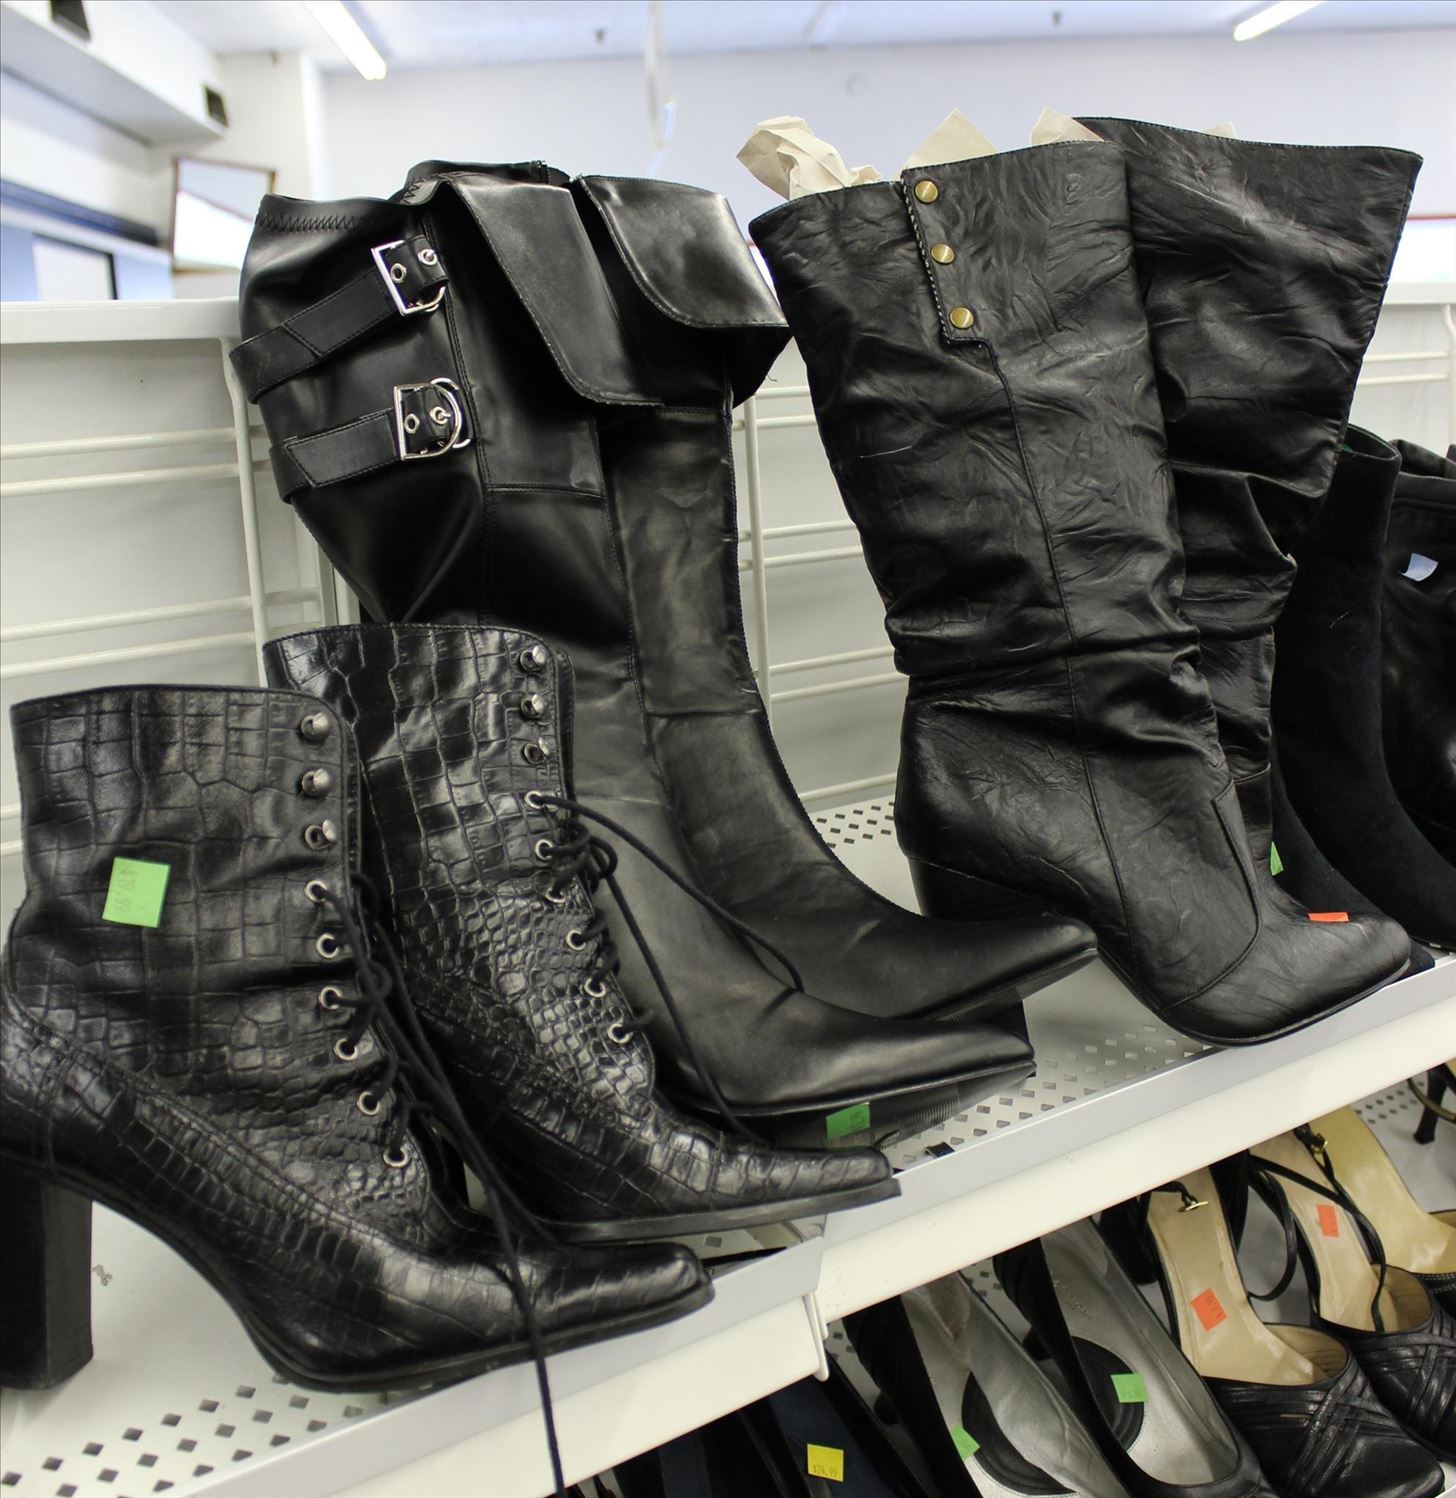 Steampunk on a Thrift-Store Budget: A Guide to Successful Thrifting